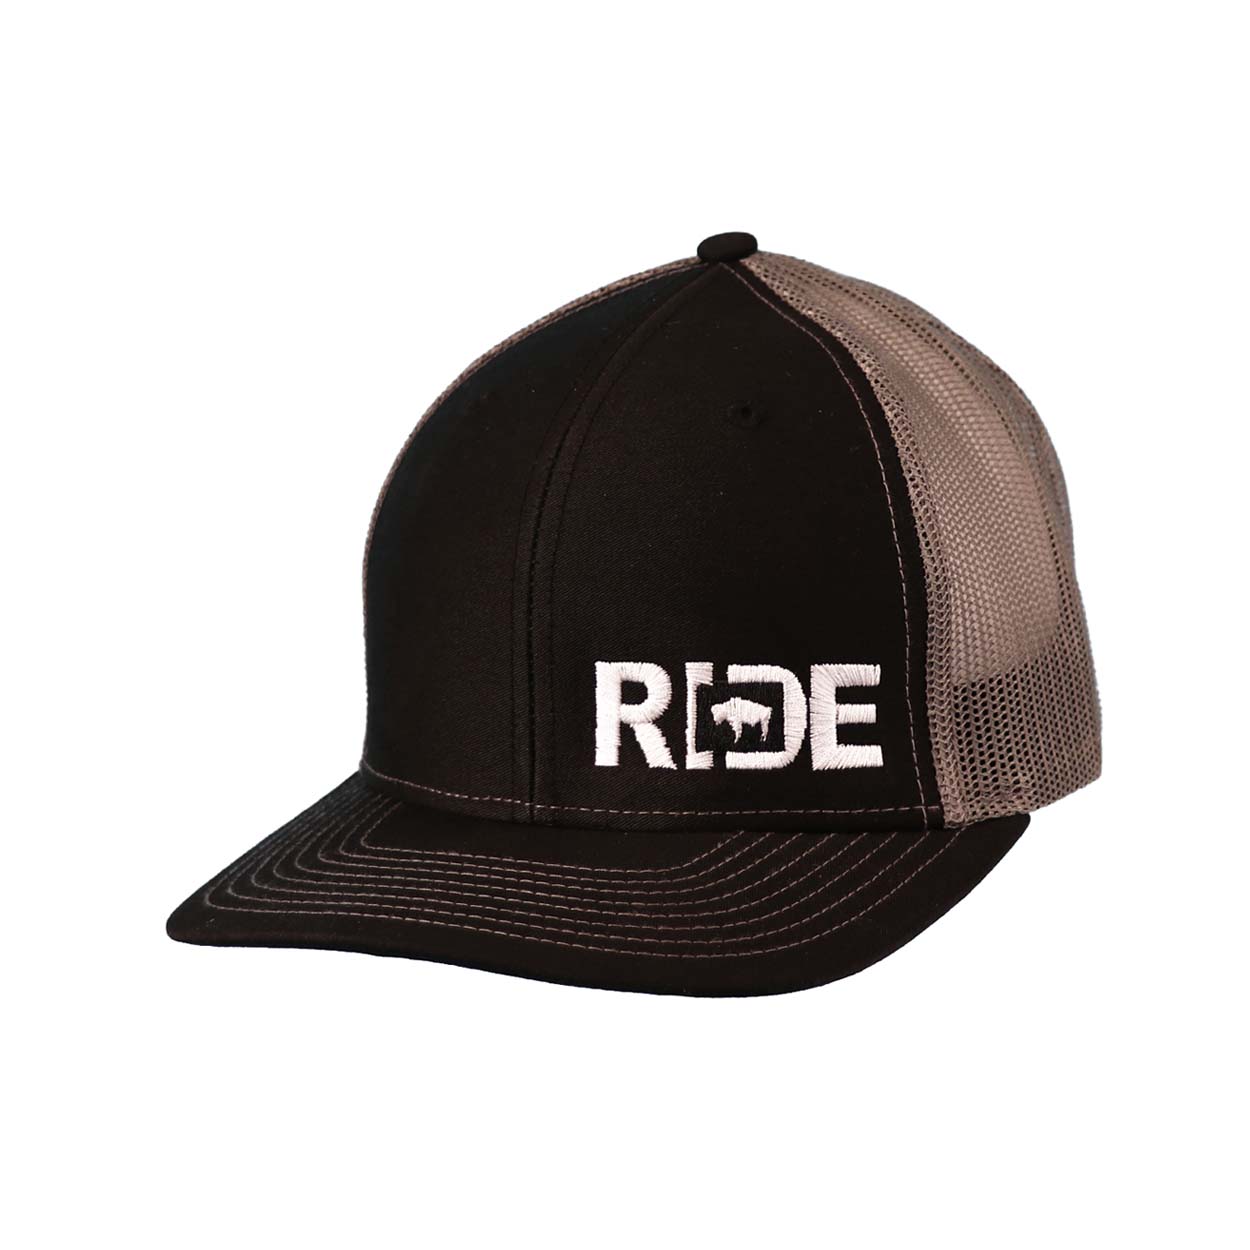 Ride Wyoming Night Out Embroidered Snapback Trucker Hat Black/Charcoal